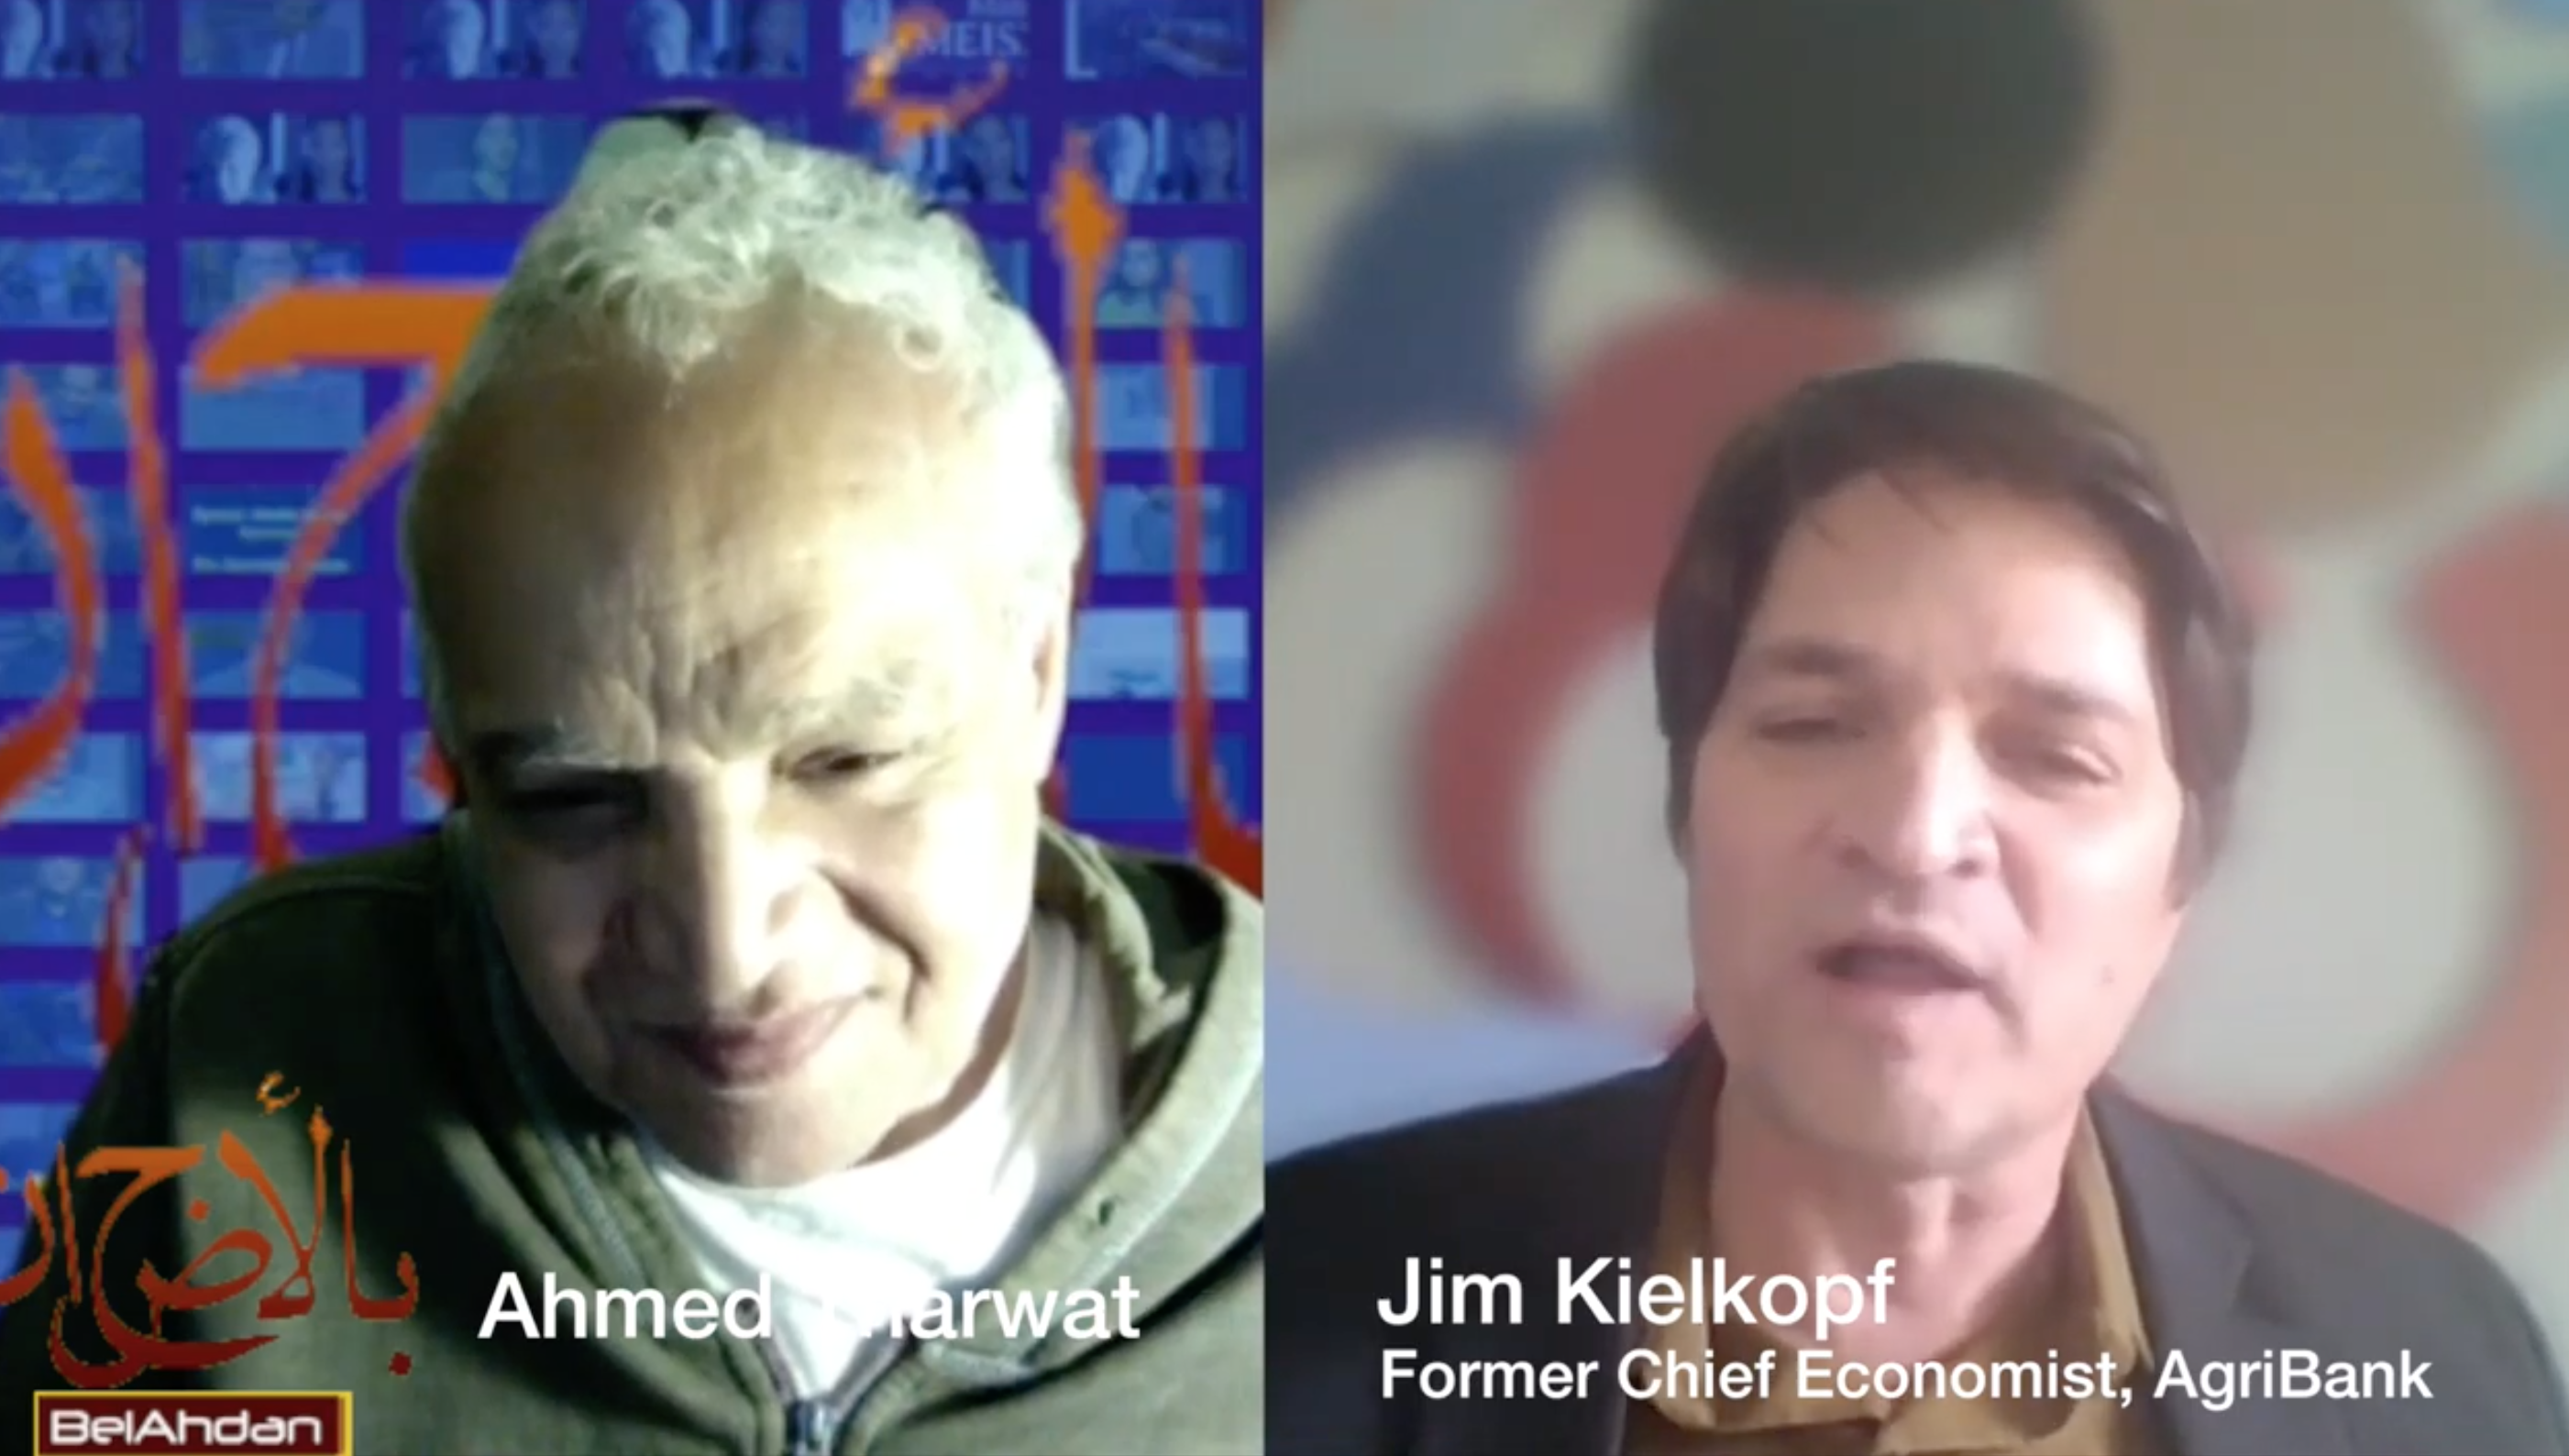 WOLRD REACTION TO THE PANDEMIC, AND AMERICAN GLOBAL ROLE, WITH CHIEF ECONOMIST JIM KIELKOPF